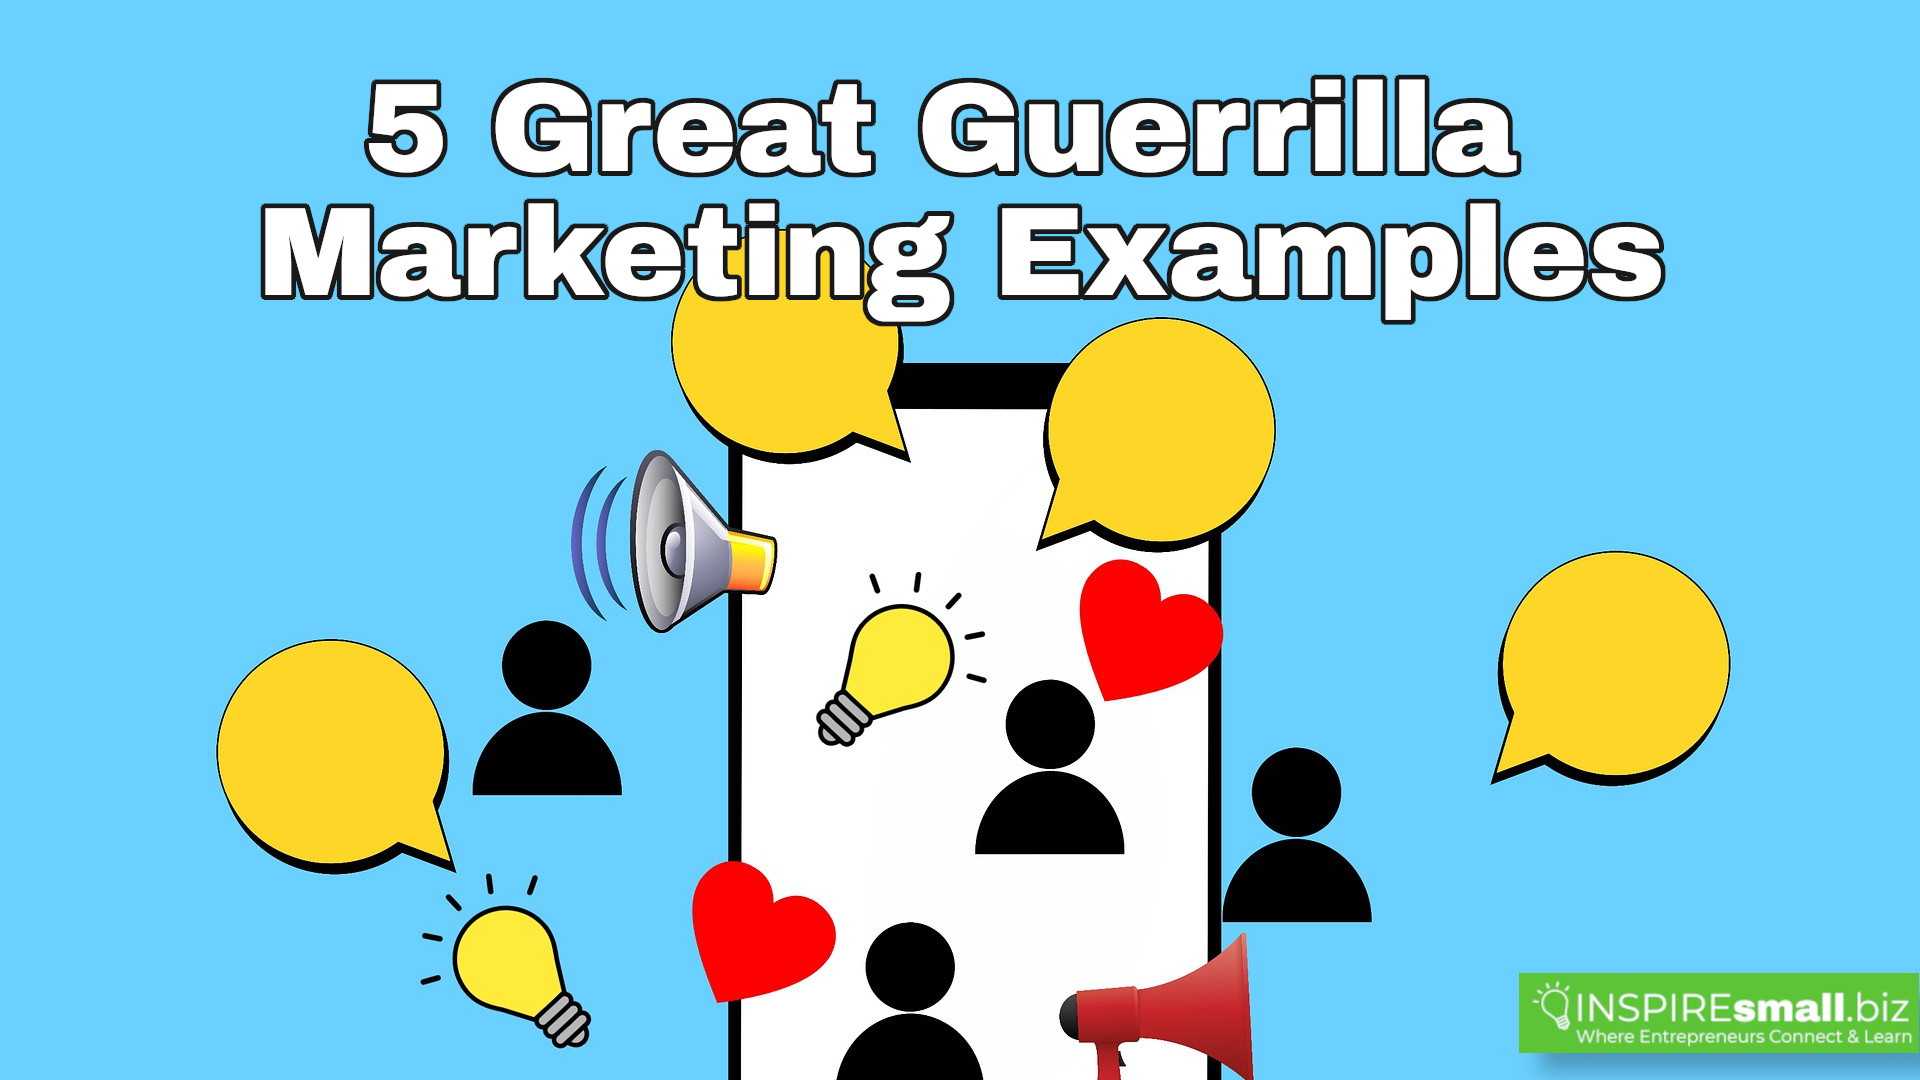 5 Great Guerrilla Marketing Examples over a light blue background, with lots of icons of users in black, hearts in red, chat boxes in gold, a audio speaker, and some yellow light bulbs, are all layered over a cell phone in the distance.